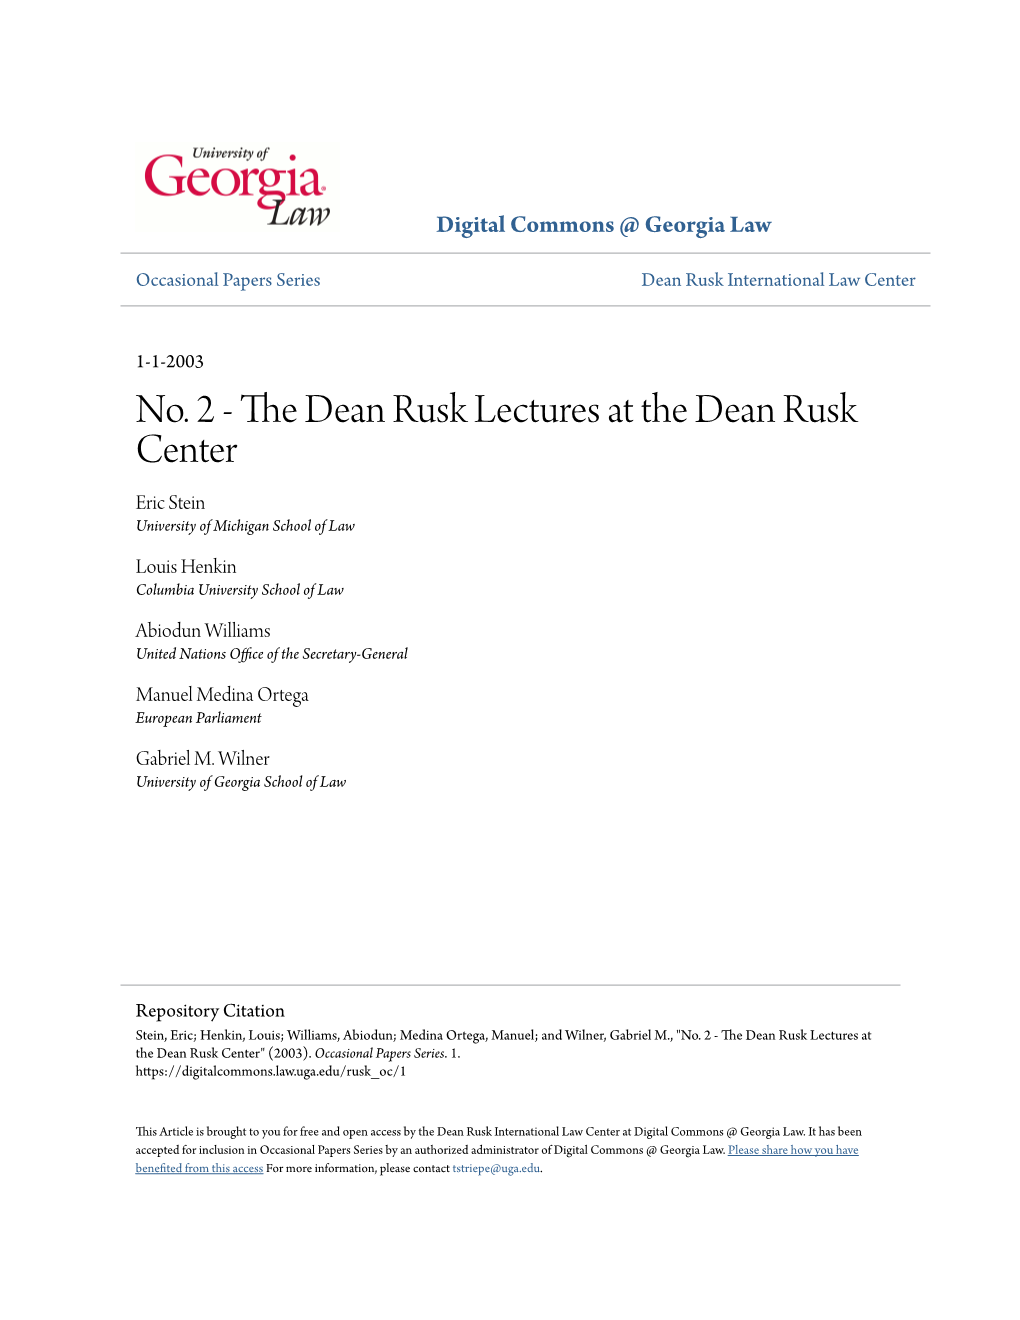 The Dean Rusk Lectures at the Dean Rusk Center